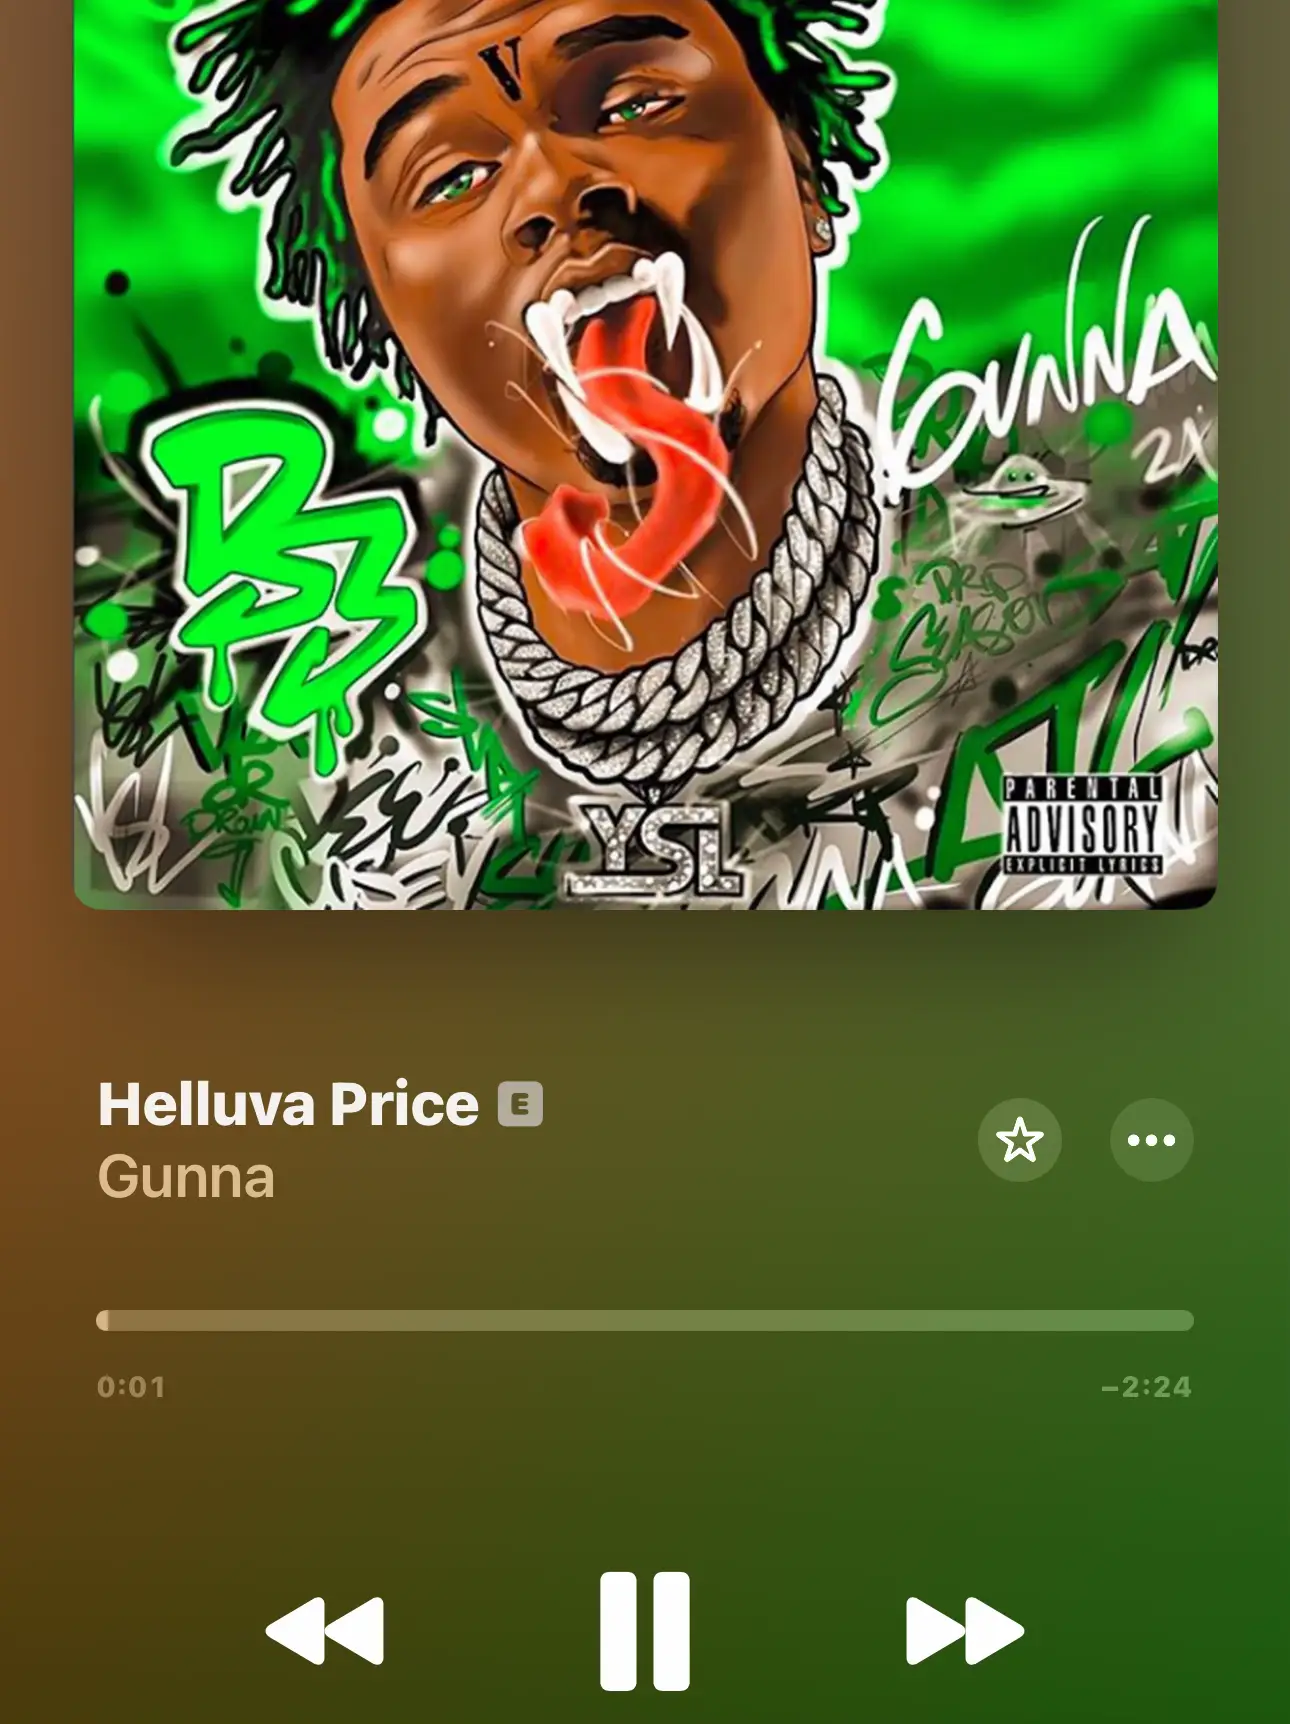  A picture of a man's mouth with the words "Helluva Price Gunna" written underneath it.